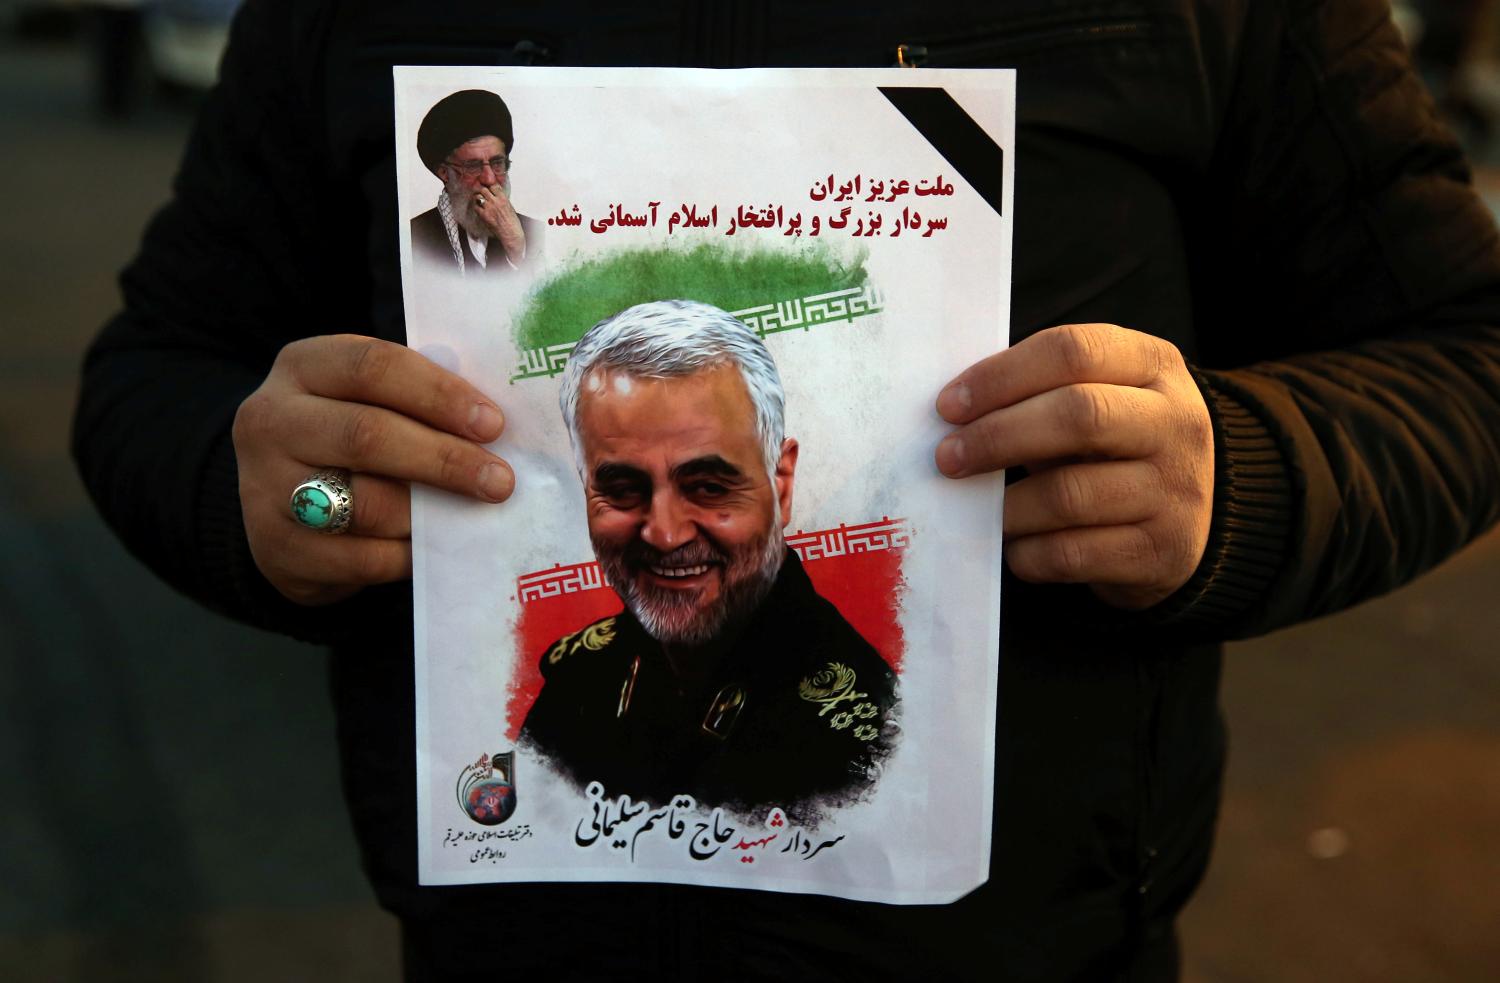 A man holds a picture of late Iranian Major-General Qassem Soleimani, as people celebrate in the street after Iran launched missiles at U.S.-led forces in Iraq, in Tehran, Iran January 8, 2020. Nazanin Tabatabaee/WANA (West Asia News Agency) via REUTERS ATTENTION EDITORS - THIS IMAGE HAS BEEN SUPPLIED BY A THIRD PARTY